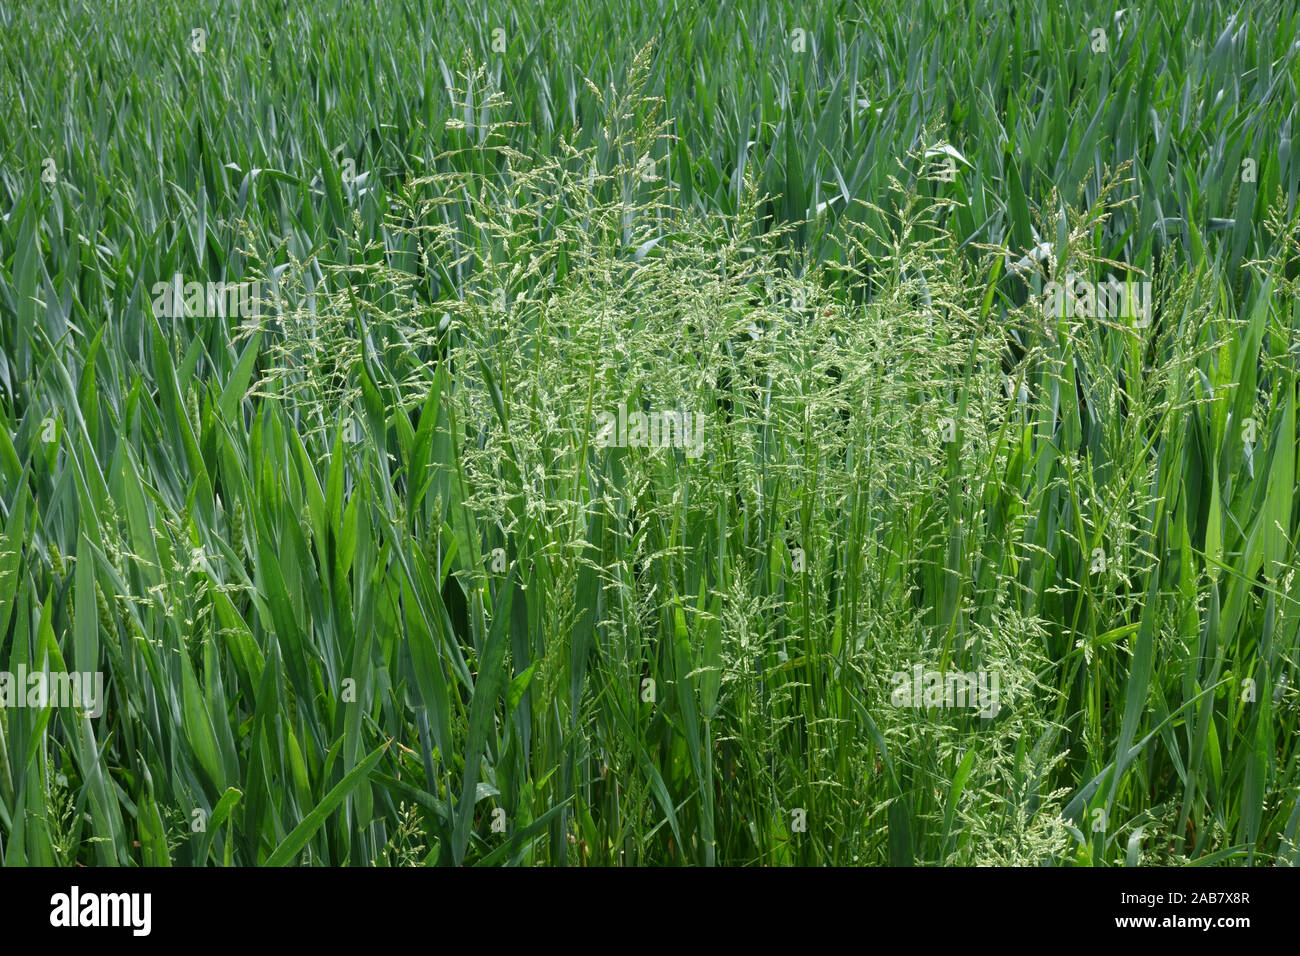 Flowering smooth-stalked meadow-grass, Poa pratensis, in a wheat crop with ear in boot, Berkshire, May Stock Photo